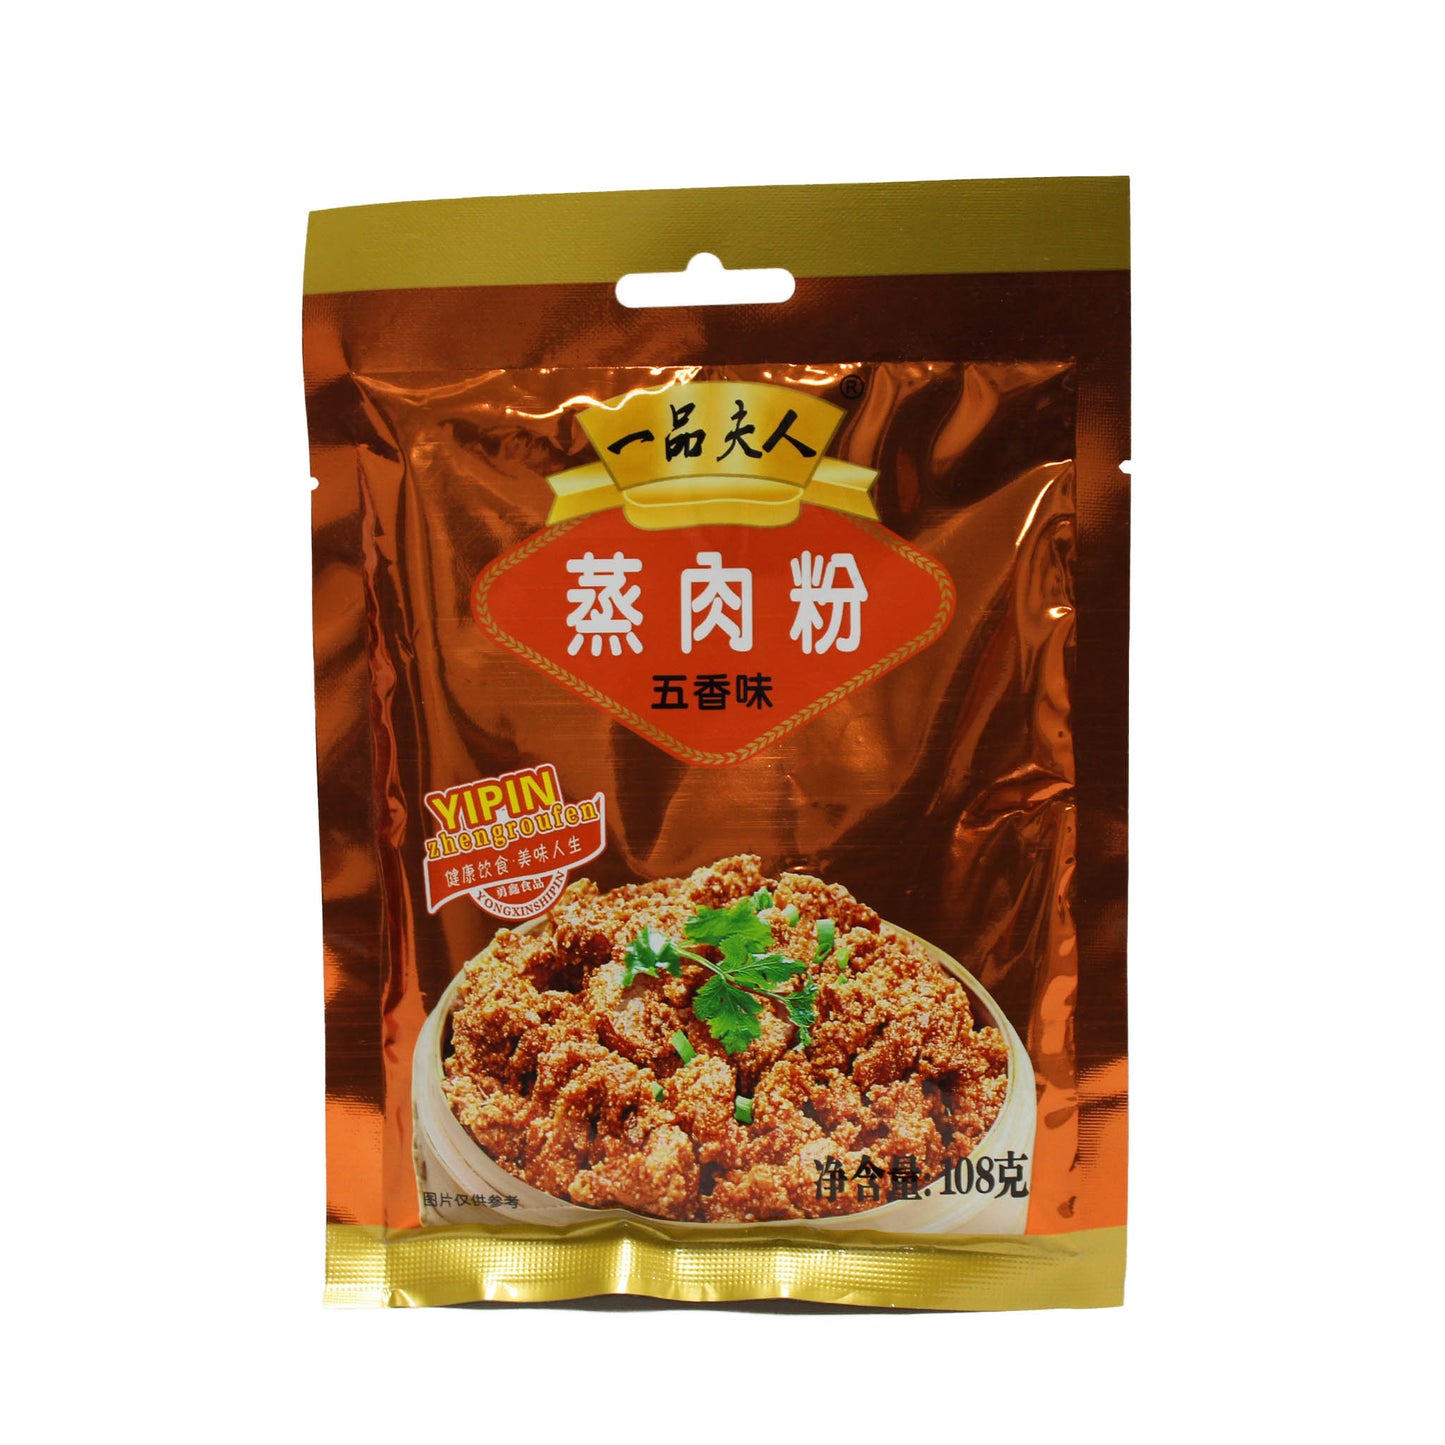 MIX SPICES RICE POWDER (STAR ANISE Flav) (108g*50)